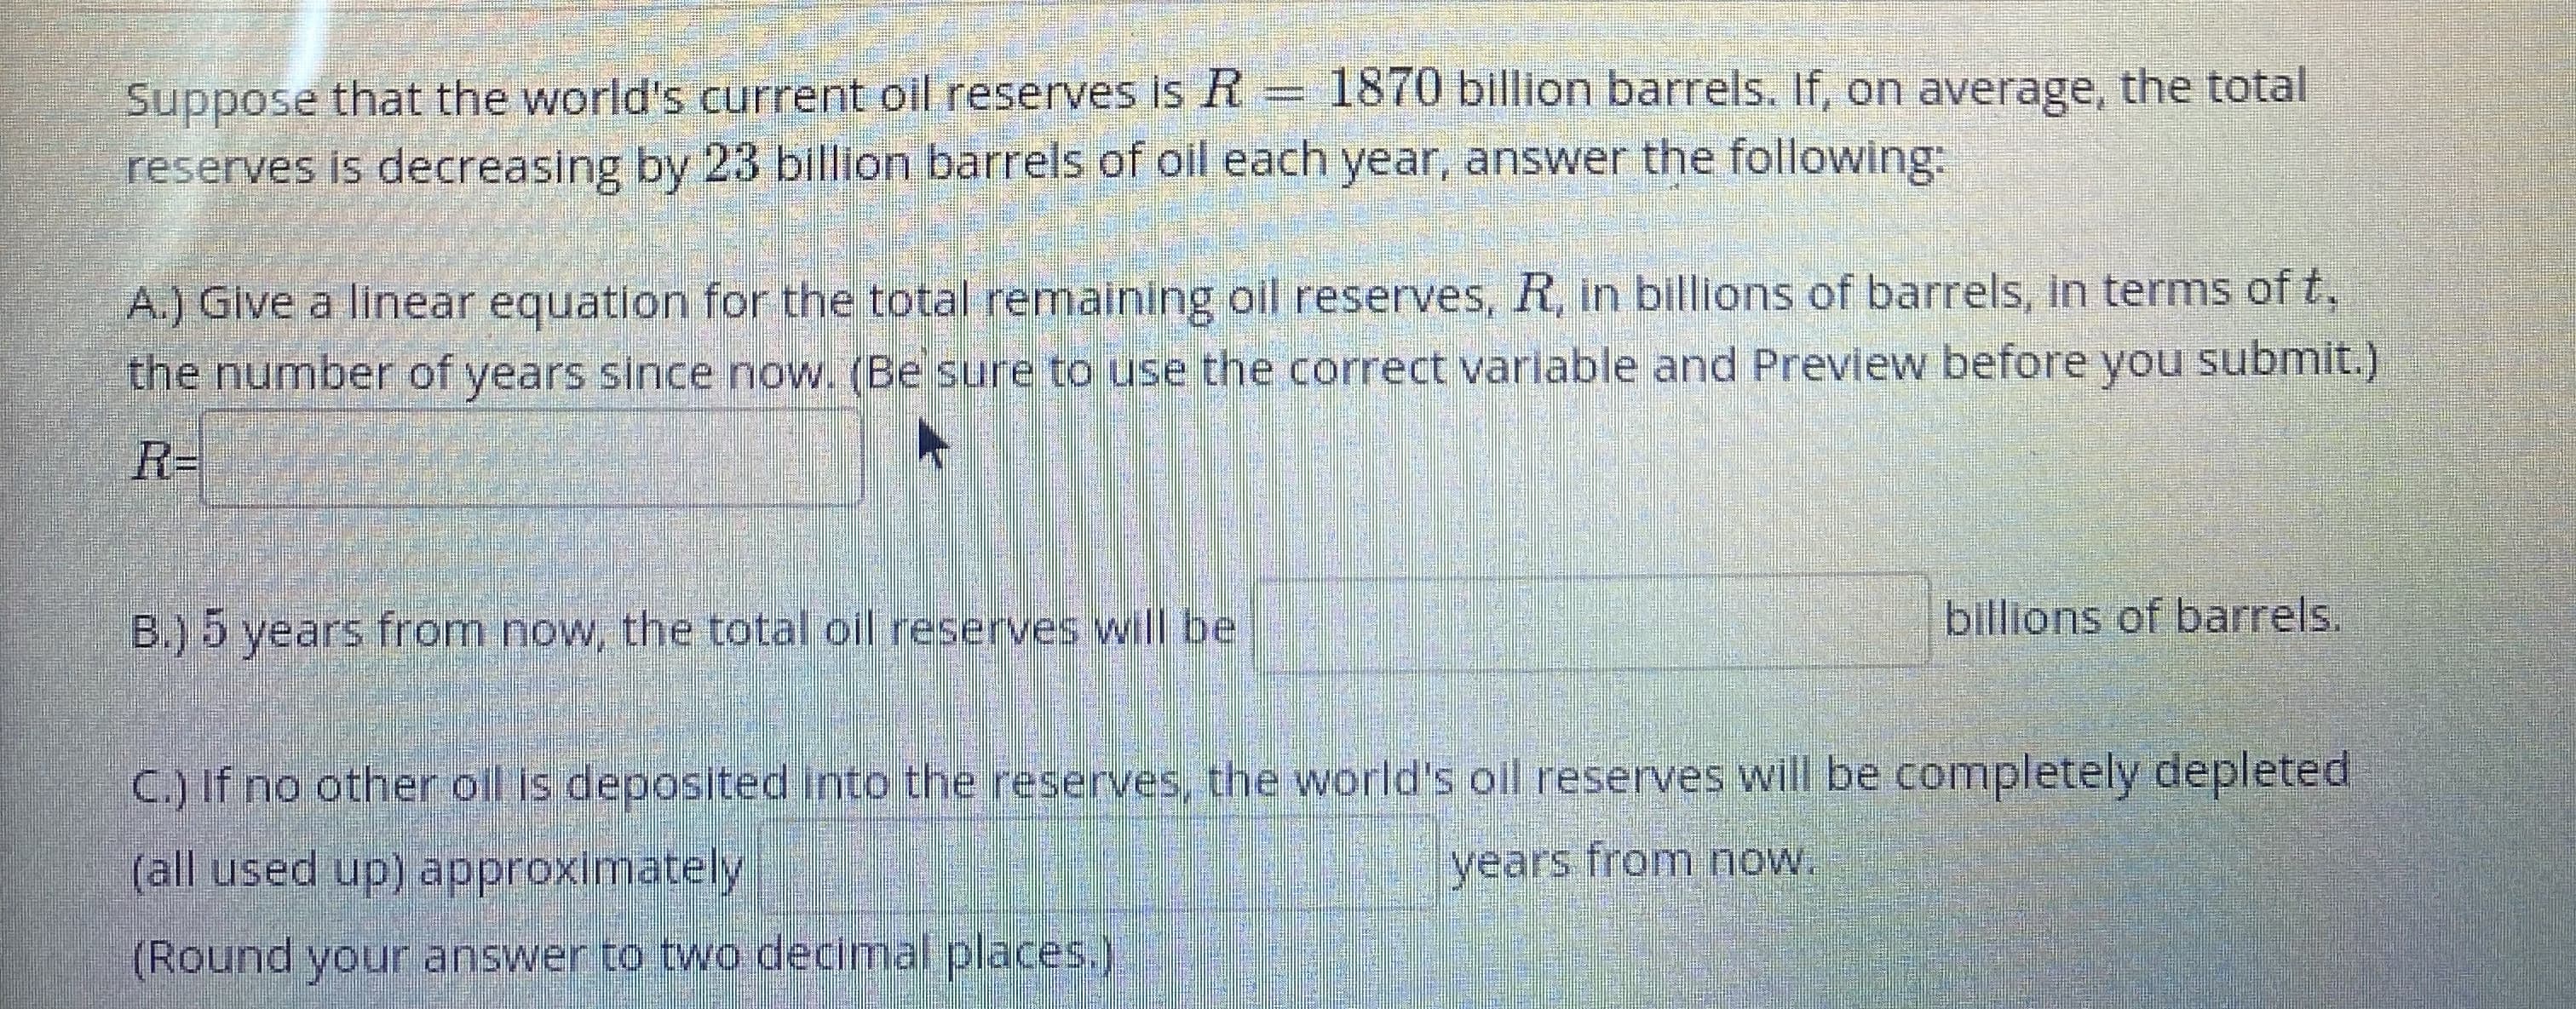 that the world's current oil reserves is R= 1870 billion barrels. If, on average, the total
Suppose
reserves is decreasing by 23 billion barrels of oil each year, answer the following:
